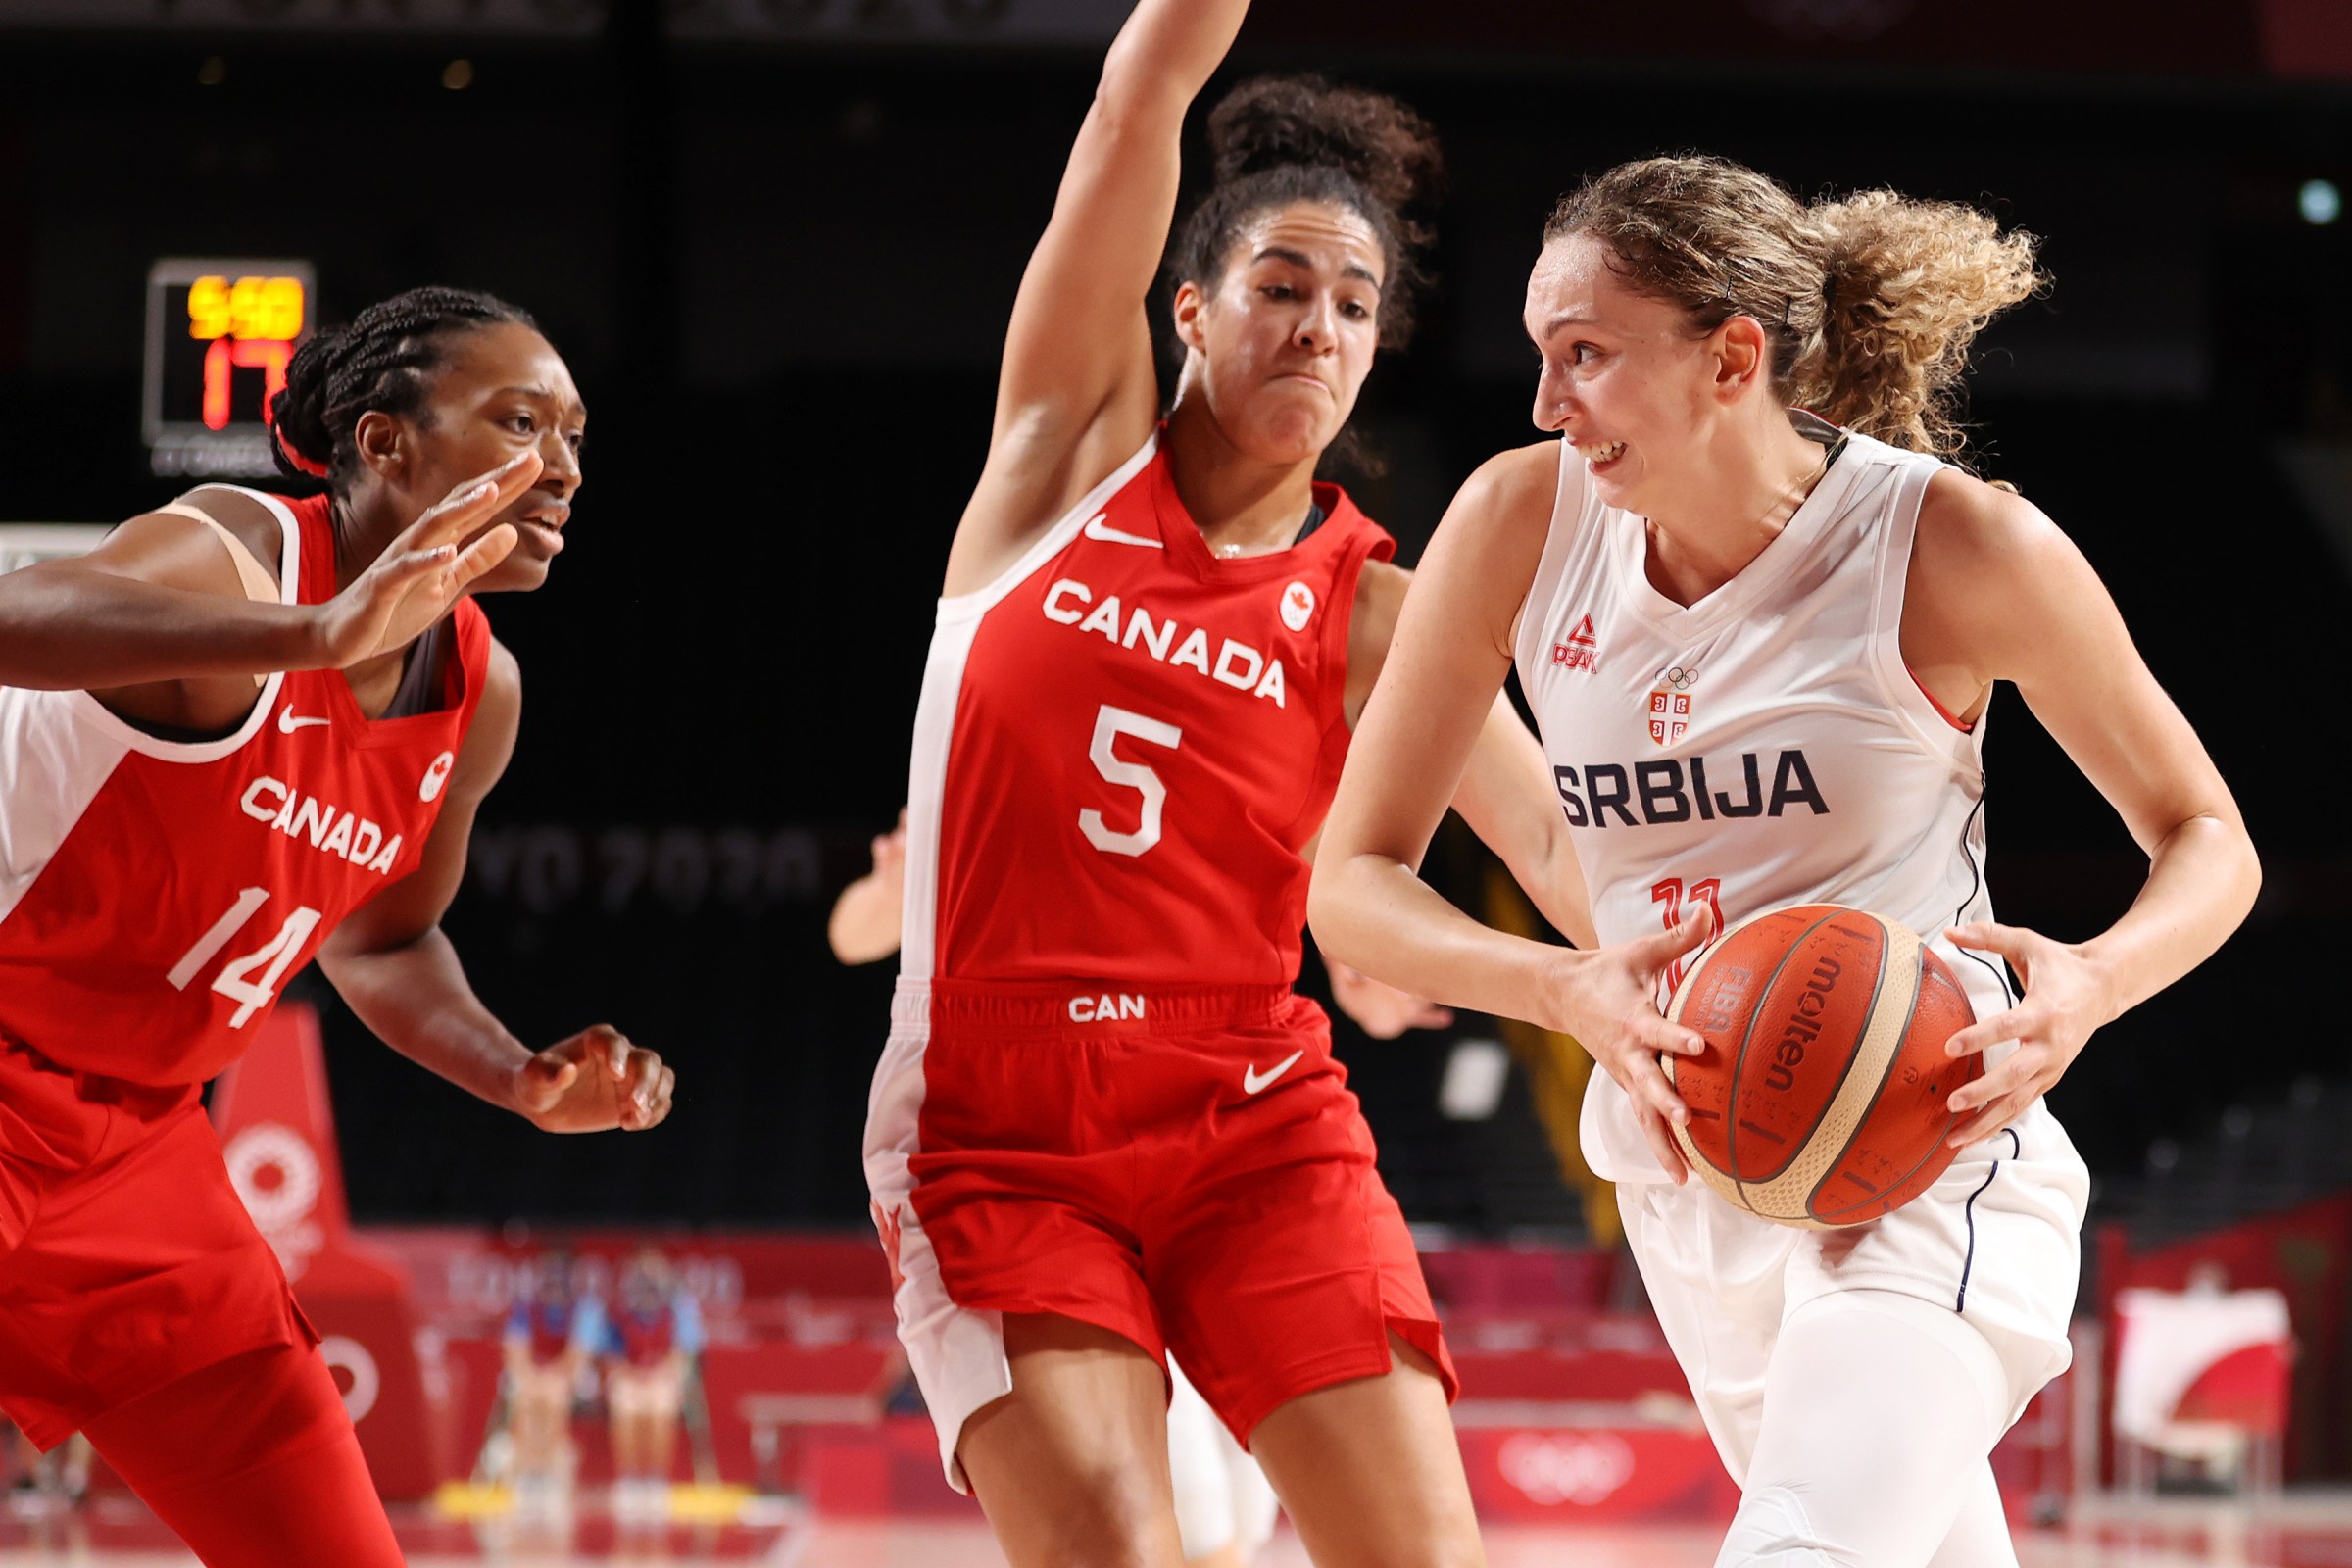 Aleksandra Crvendakic #11 of Team Serbia drives to the basket against Kayla Alexander #14 and Kia Nurse #5 of Team Canada during the first half of the Women's Preliminary Round Group A game on day three of the Tokyo 2020 Olympic Games at Saitama Super Arena on July 26, 2021 in Saitama, Japan.